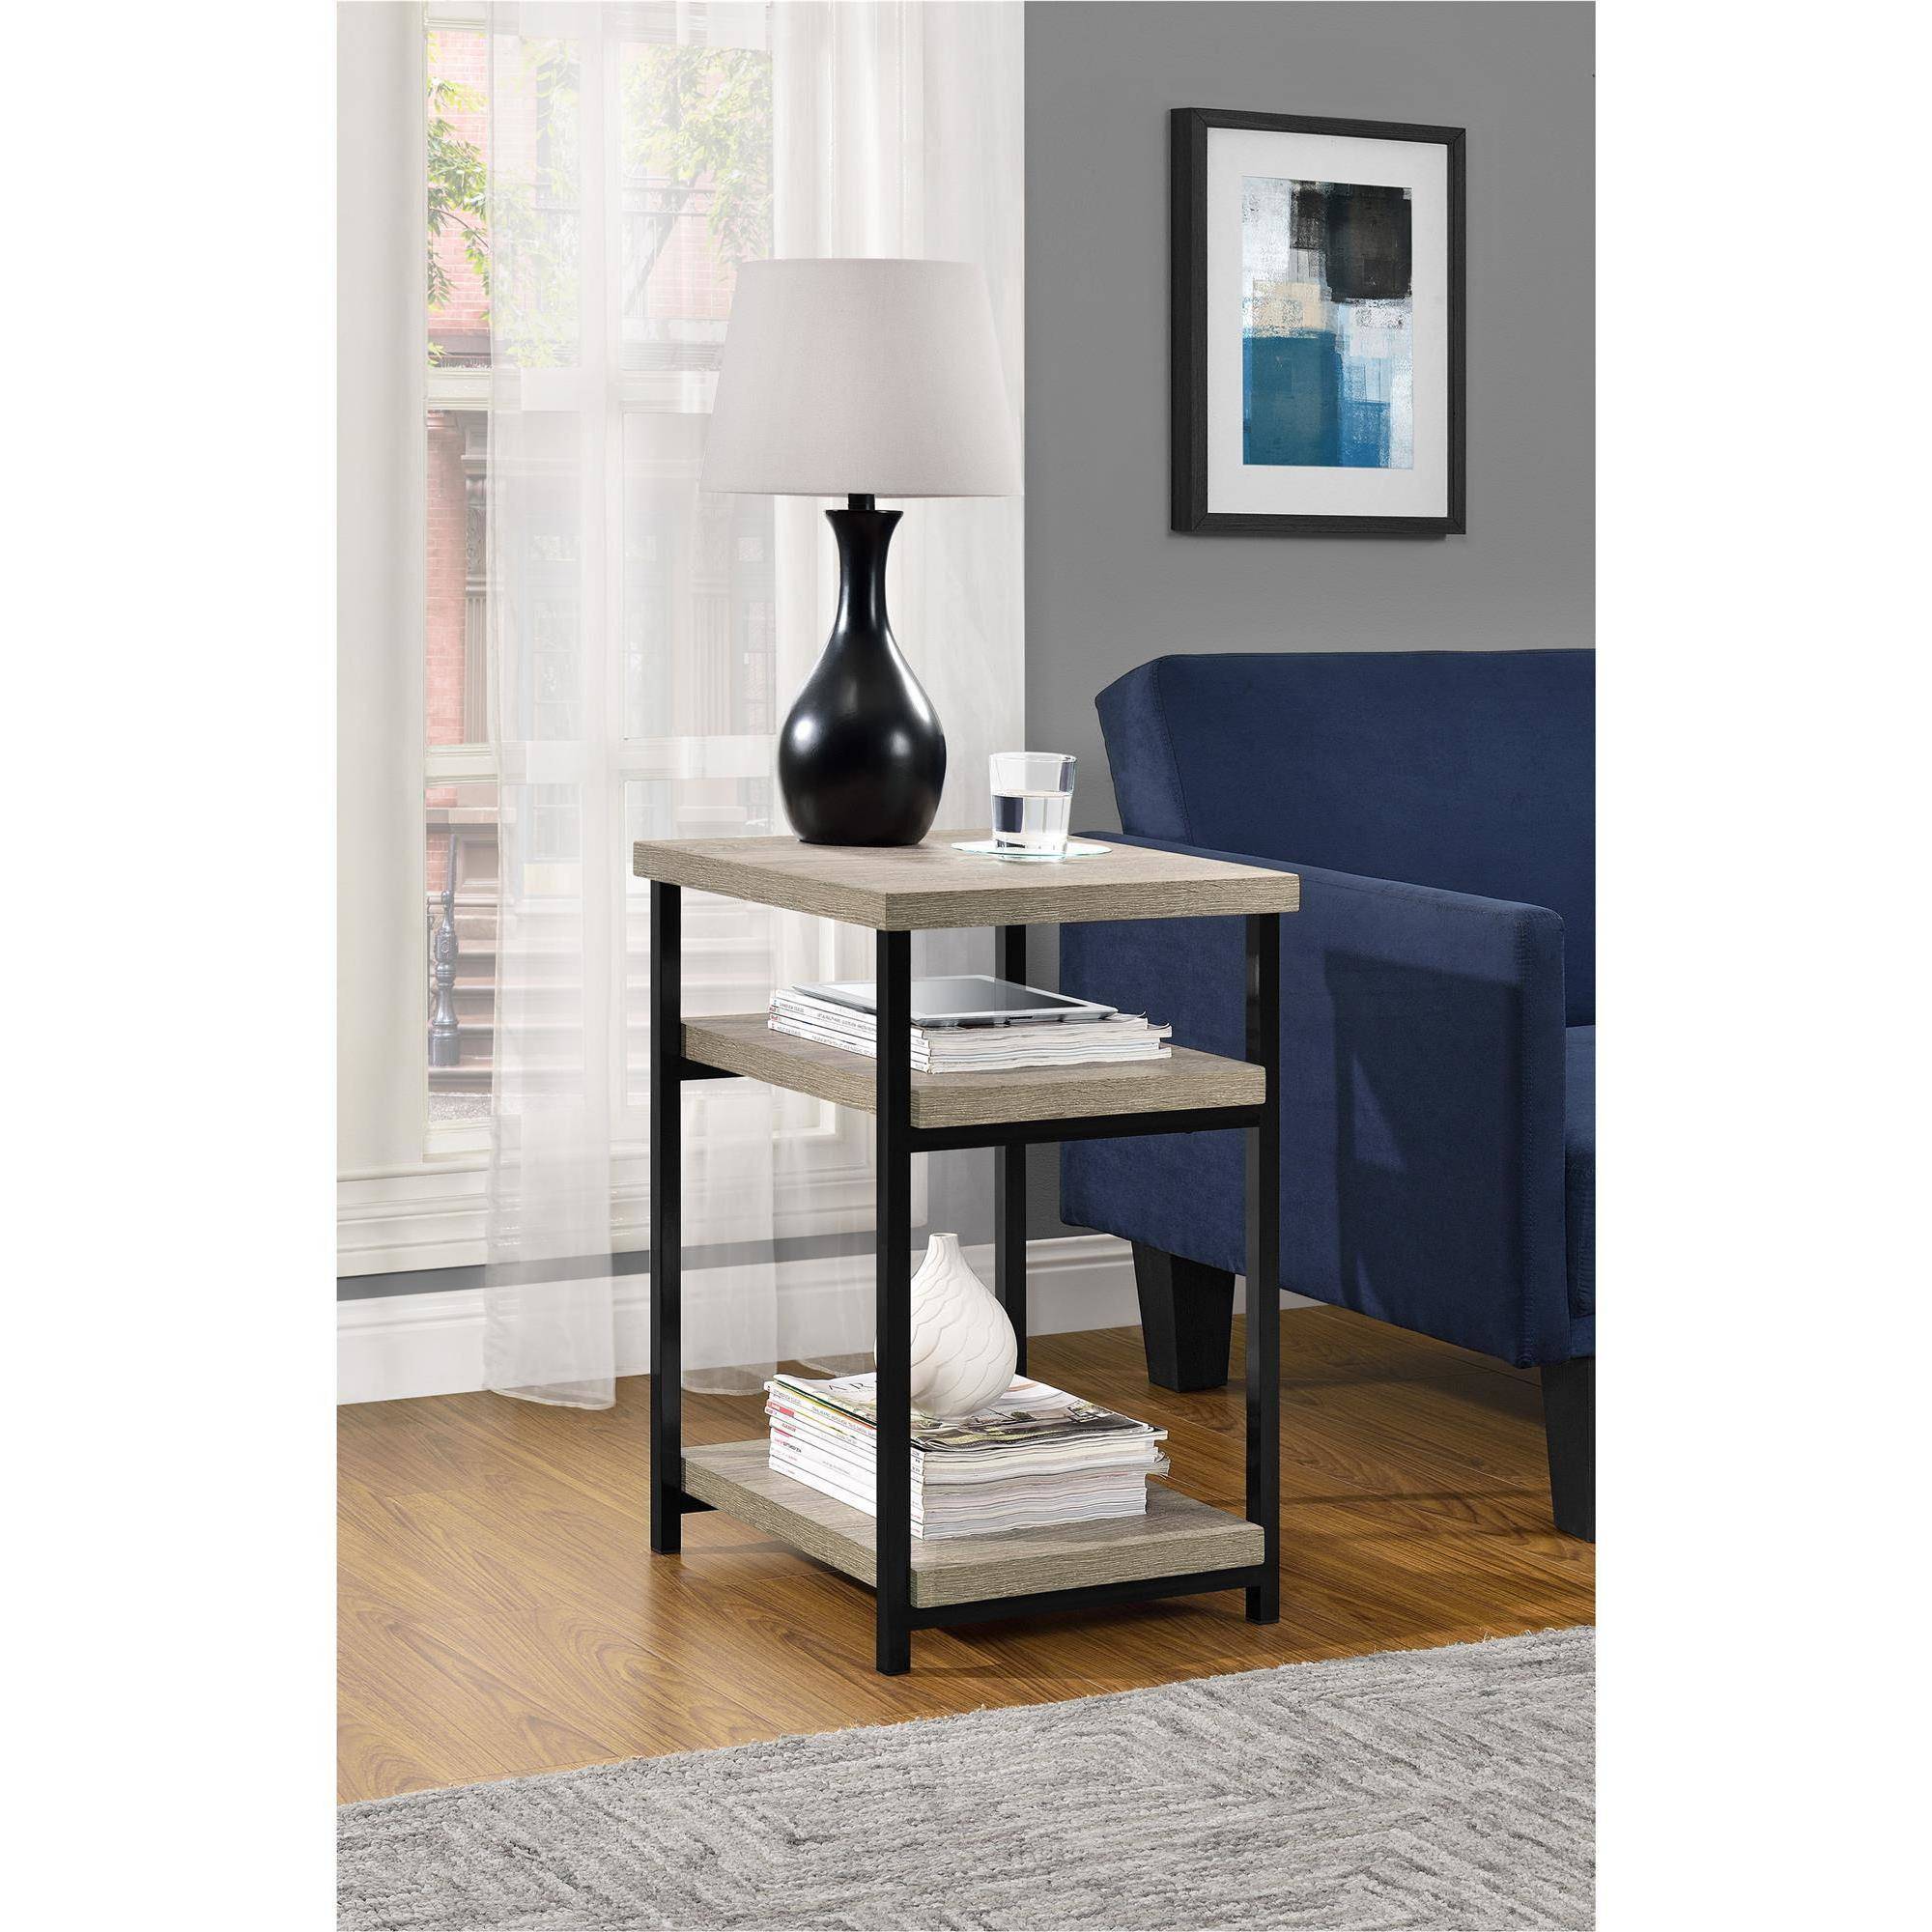 ameriwood home tipton round accent table espresso teal metal side unique rustic coffee tables grey dining room outdoor furniture cushions storage cabinet all modern tablecloth